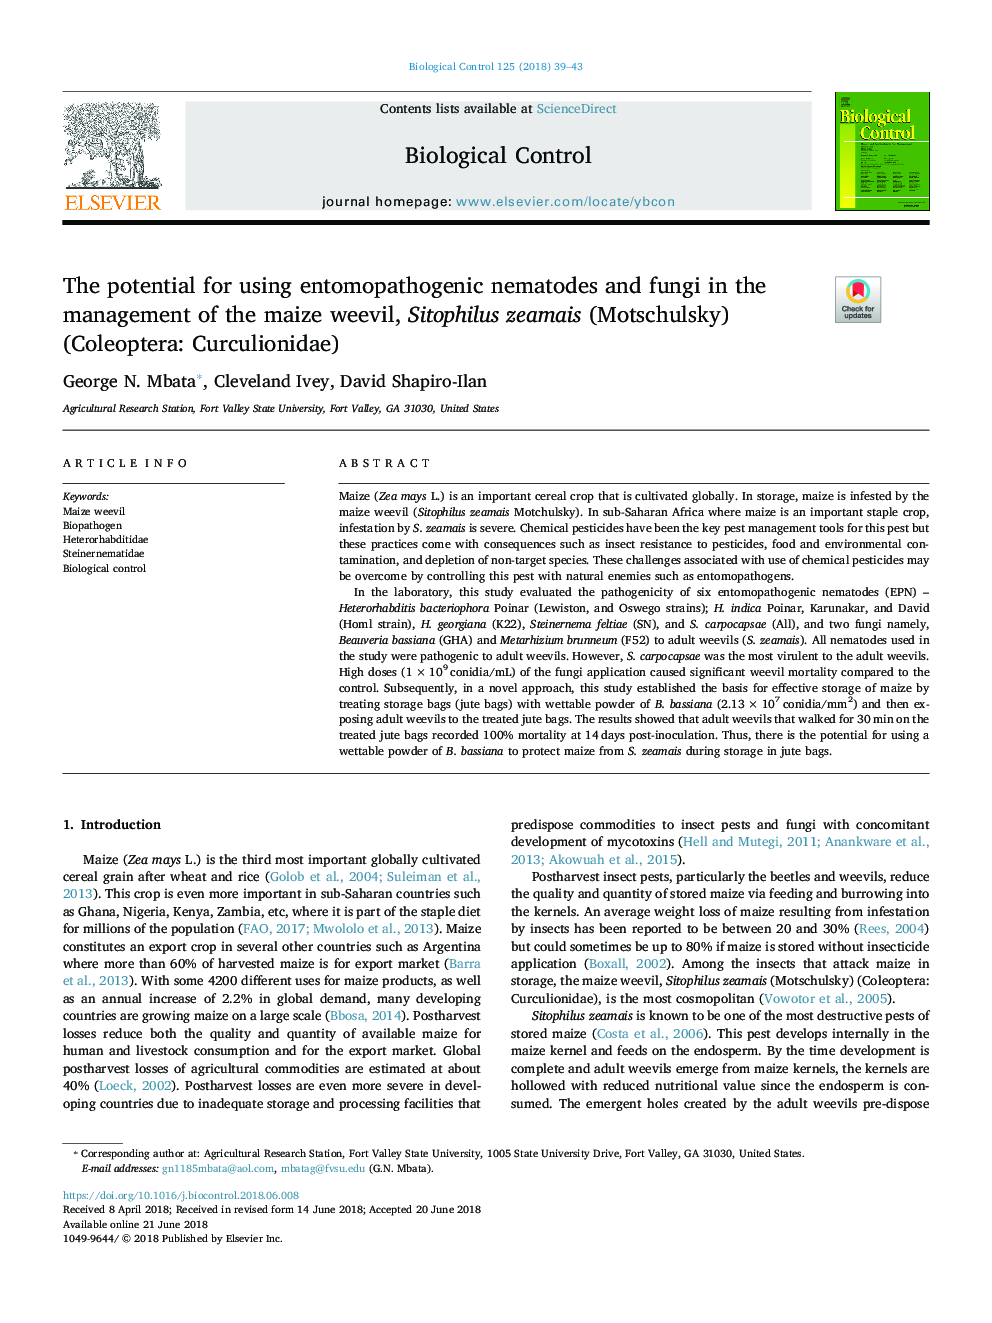 The potential for using entomopathogenic nematodes and fungi in the management of the maize weevil, Sitophilus zeamais (Motschulsky) (Coleoptera: Curculionidae)